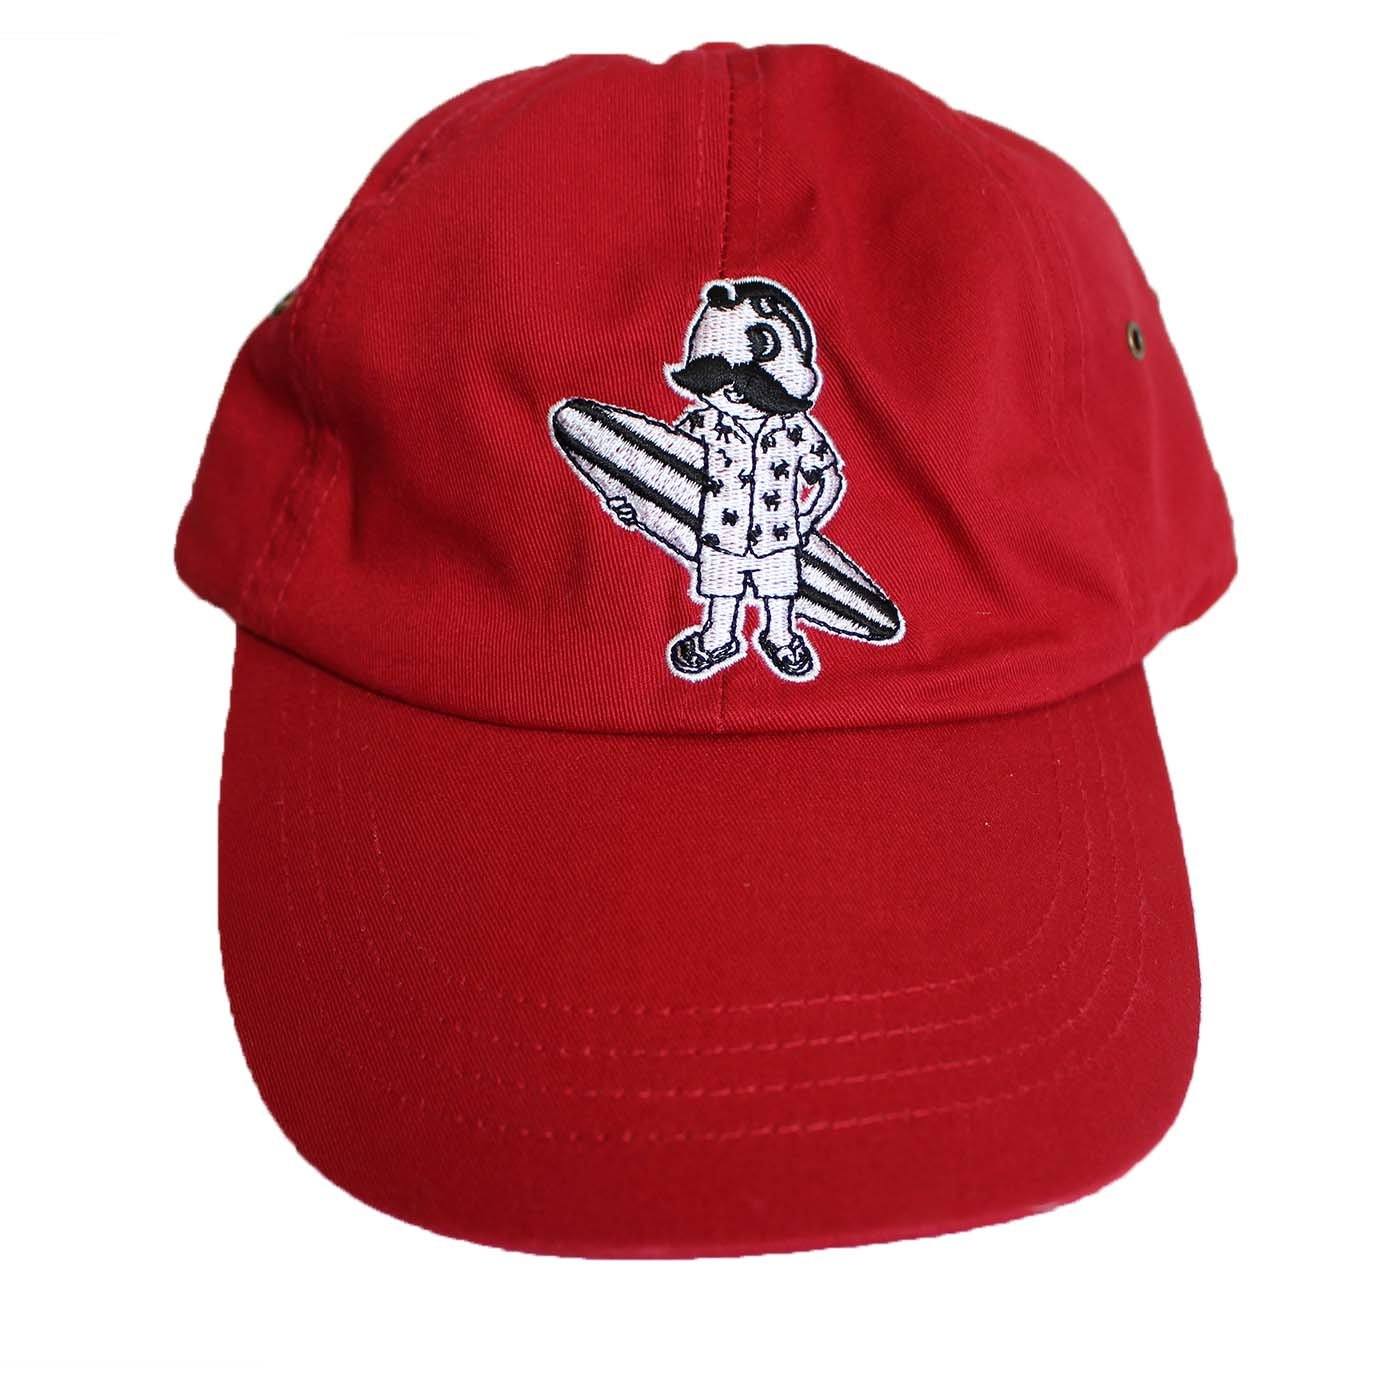 Natty Boh Surfer Dude in White (Red) / Baseball Hat - Route One Apparel